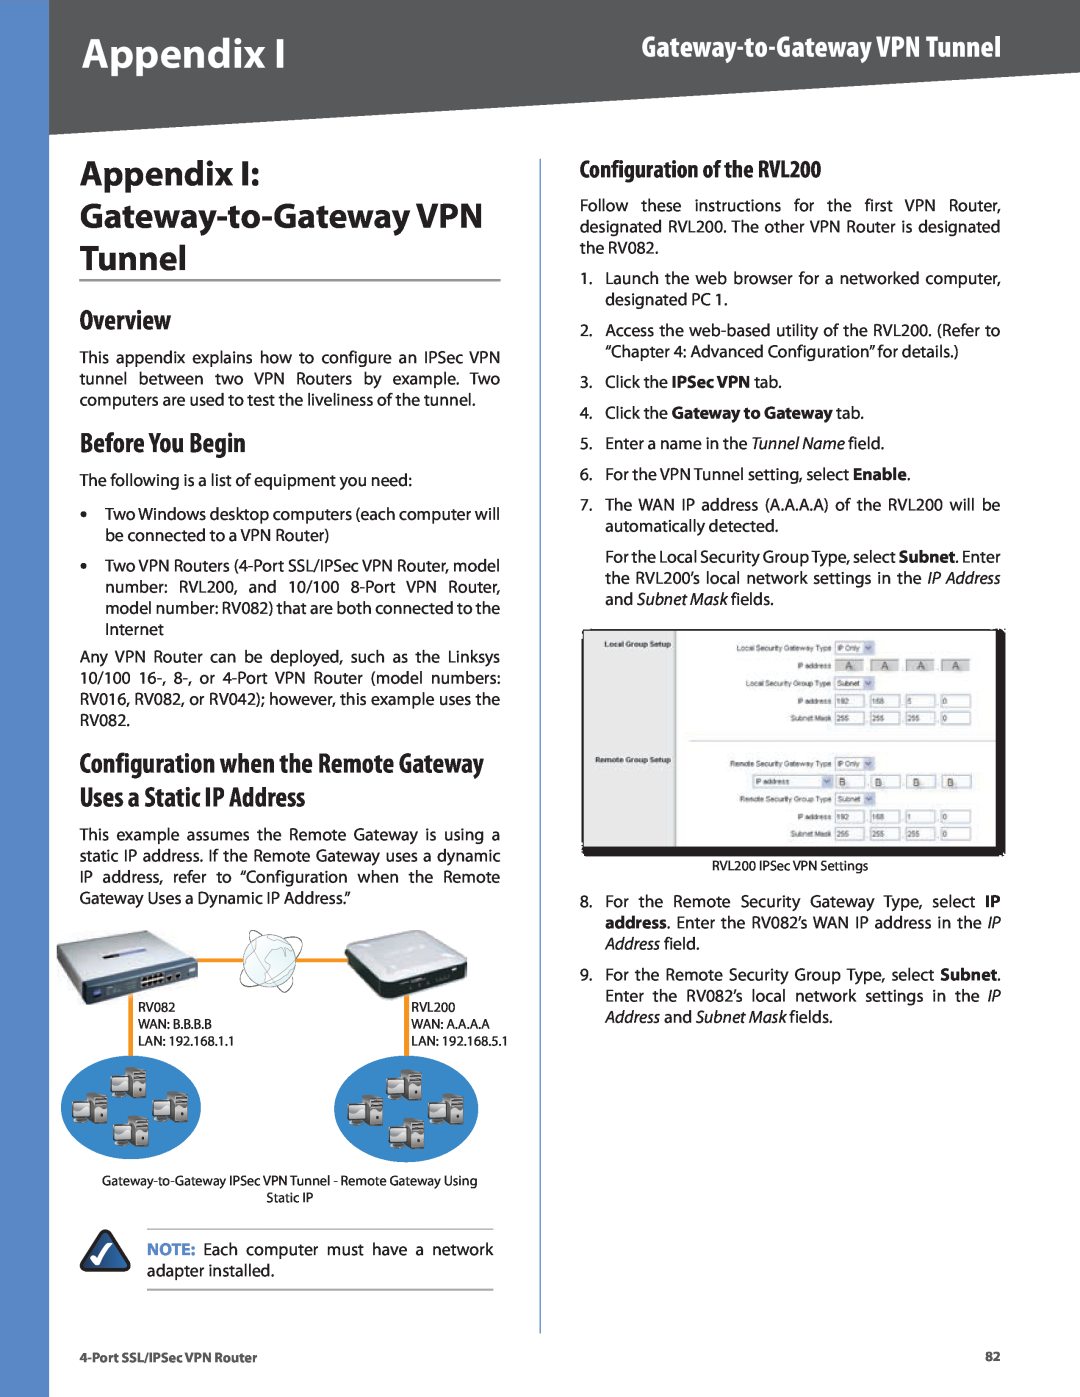 Cisco Systems Appendix Gateway-to-Gateway VPN Tunnel, Configuration of the RVL200, Click the Gateway to Gateway tab 